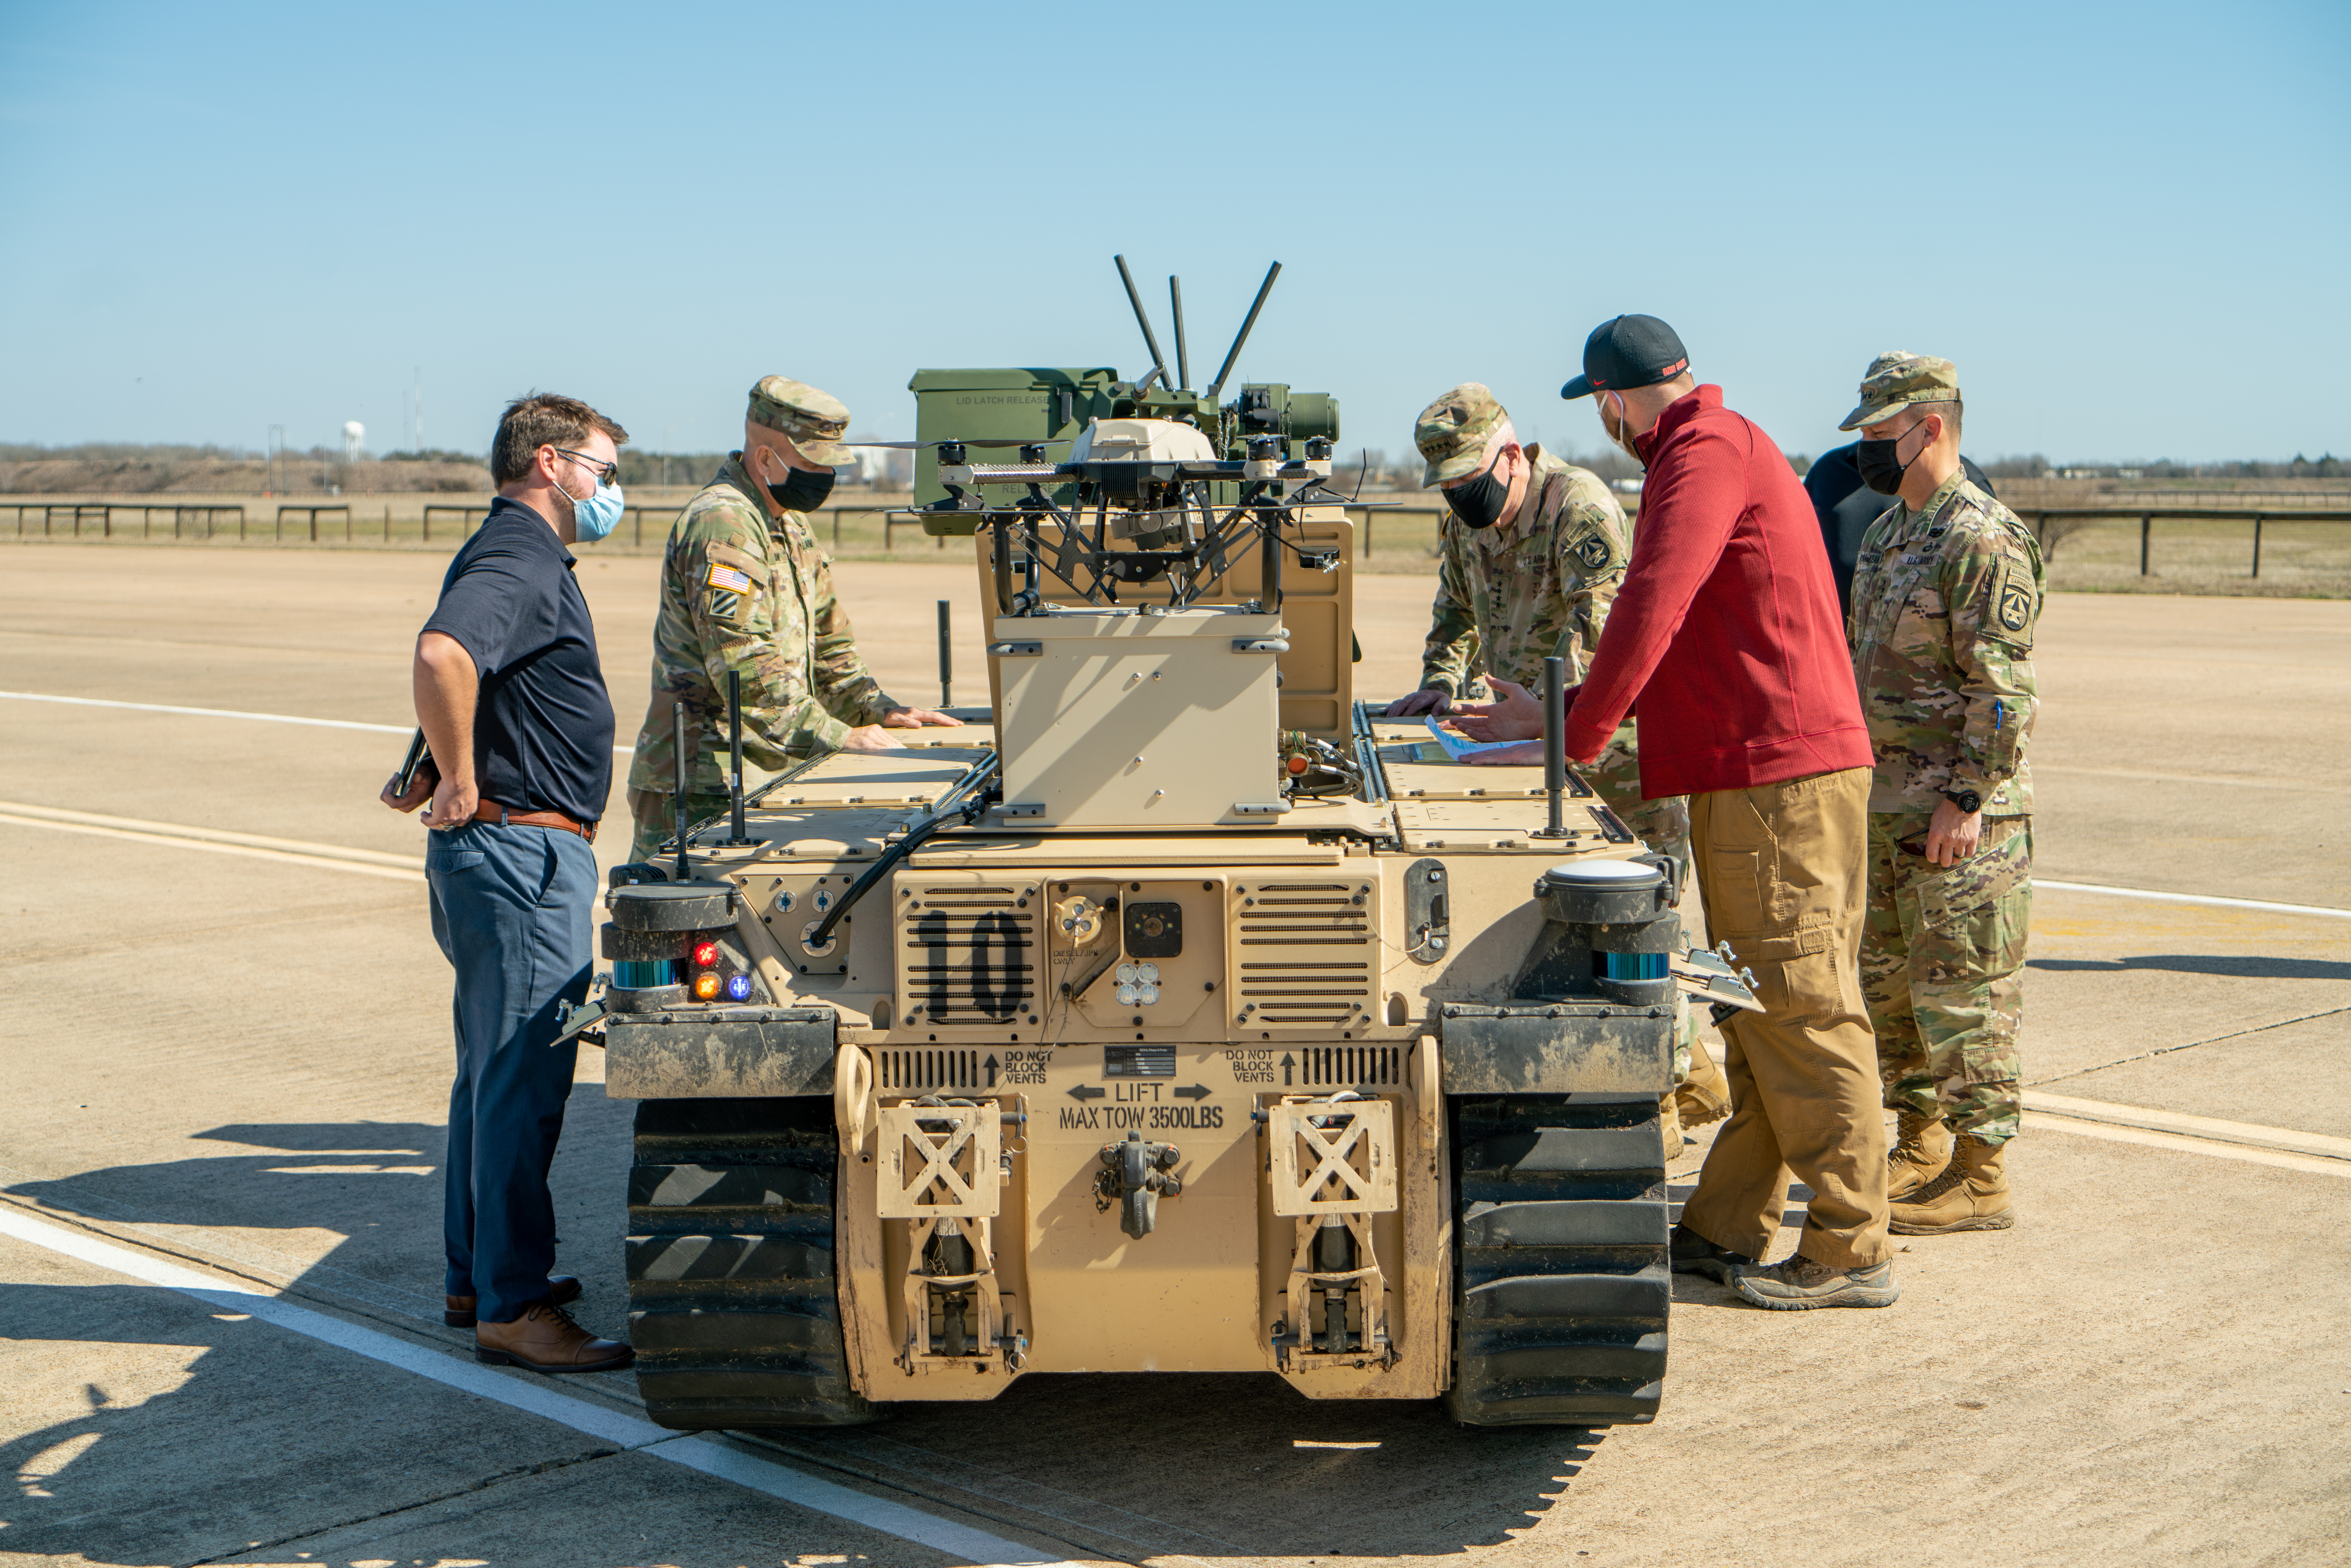 Maj. Gen. Ross Coffman, NGCV director, Gen. John Murray, AFC commanding general, and Lt. Gen. Scott McKean, AFC deputy commanding general, talk to Greg Colvin, RCV deputy chief engineer at GVSC, about the RCV-Light prototype vehicle being tested at the IPG on RELLIS Campus in February. 